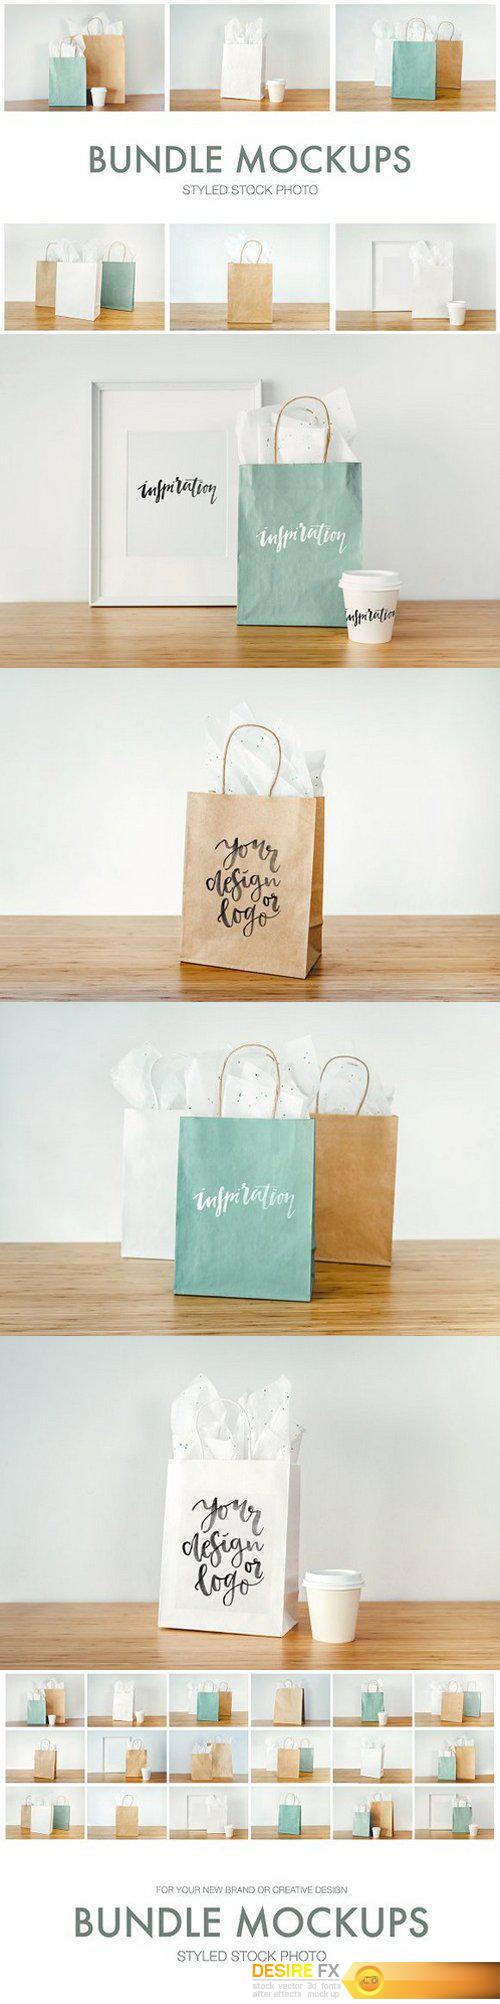 CM - Mockups bags, cups and frames 1674545